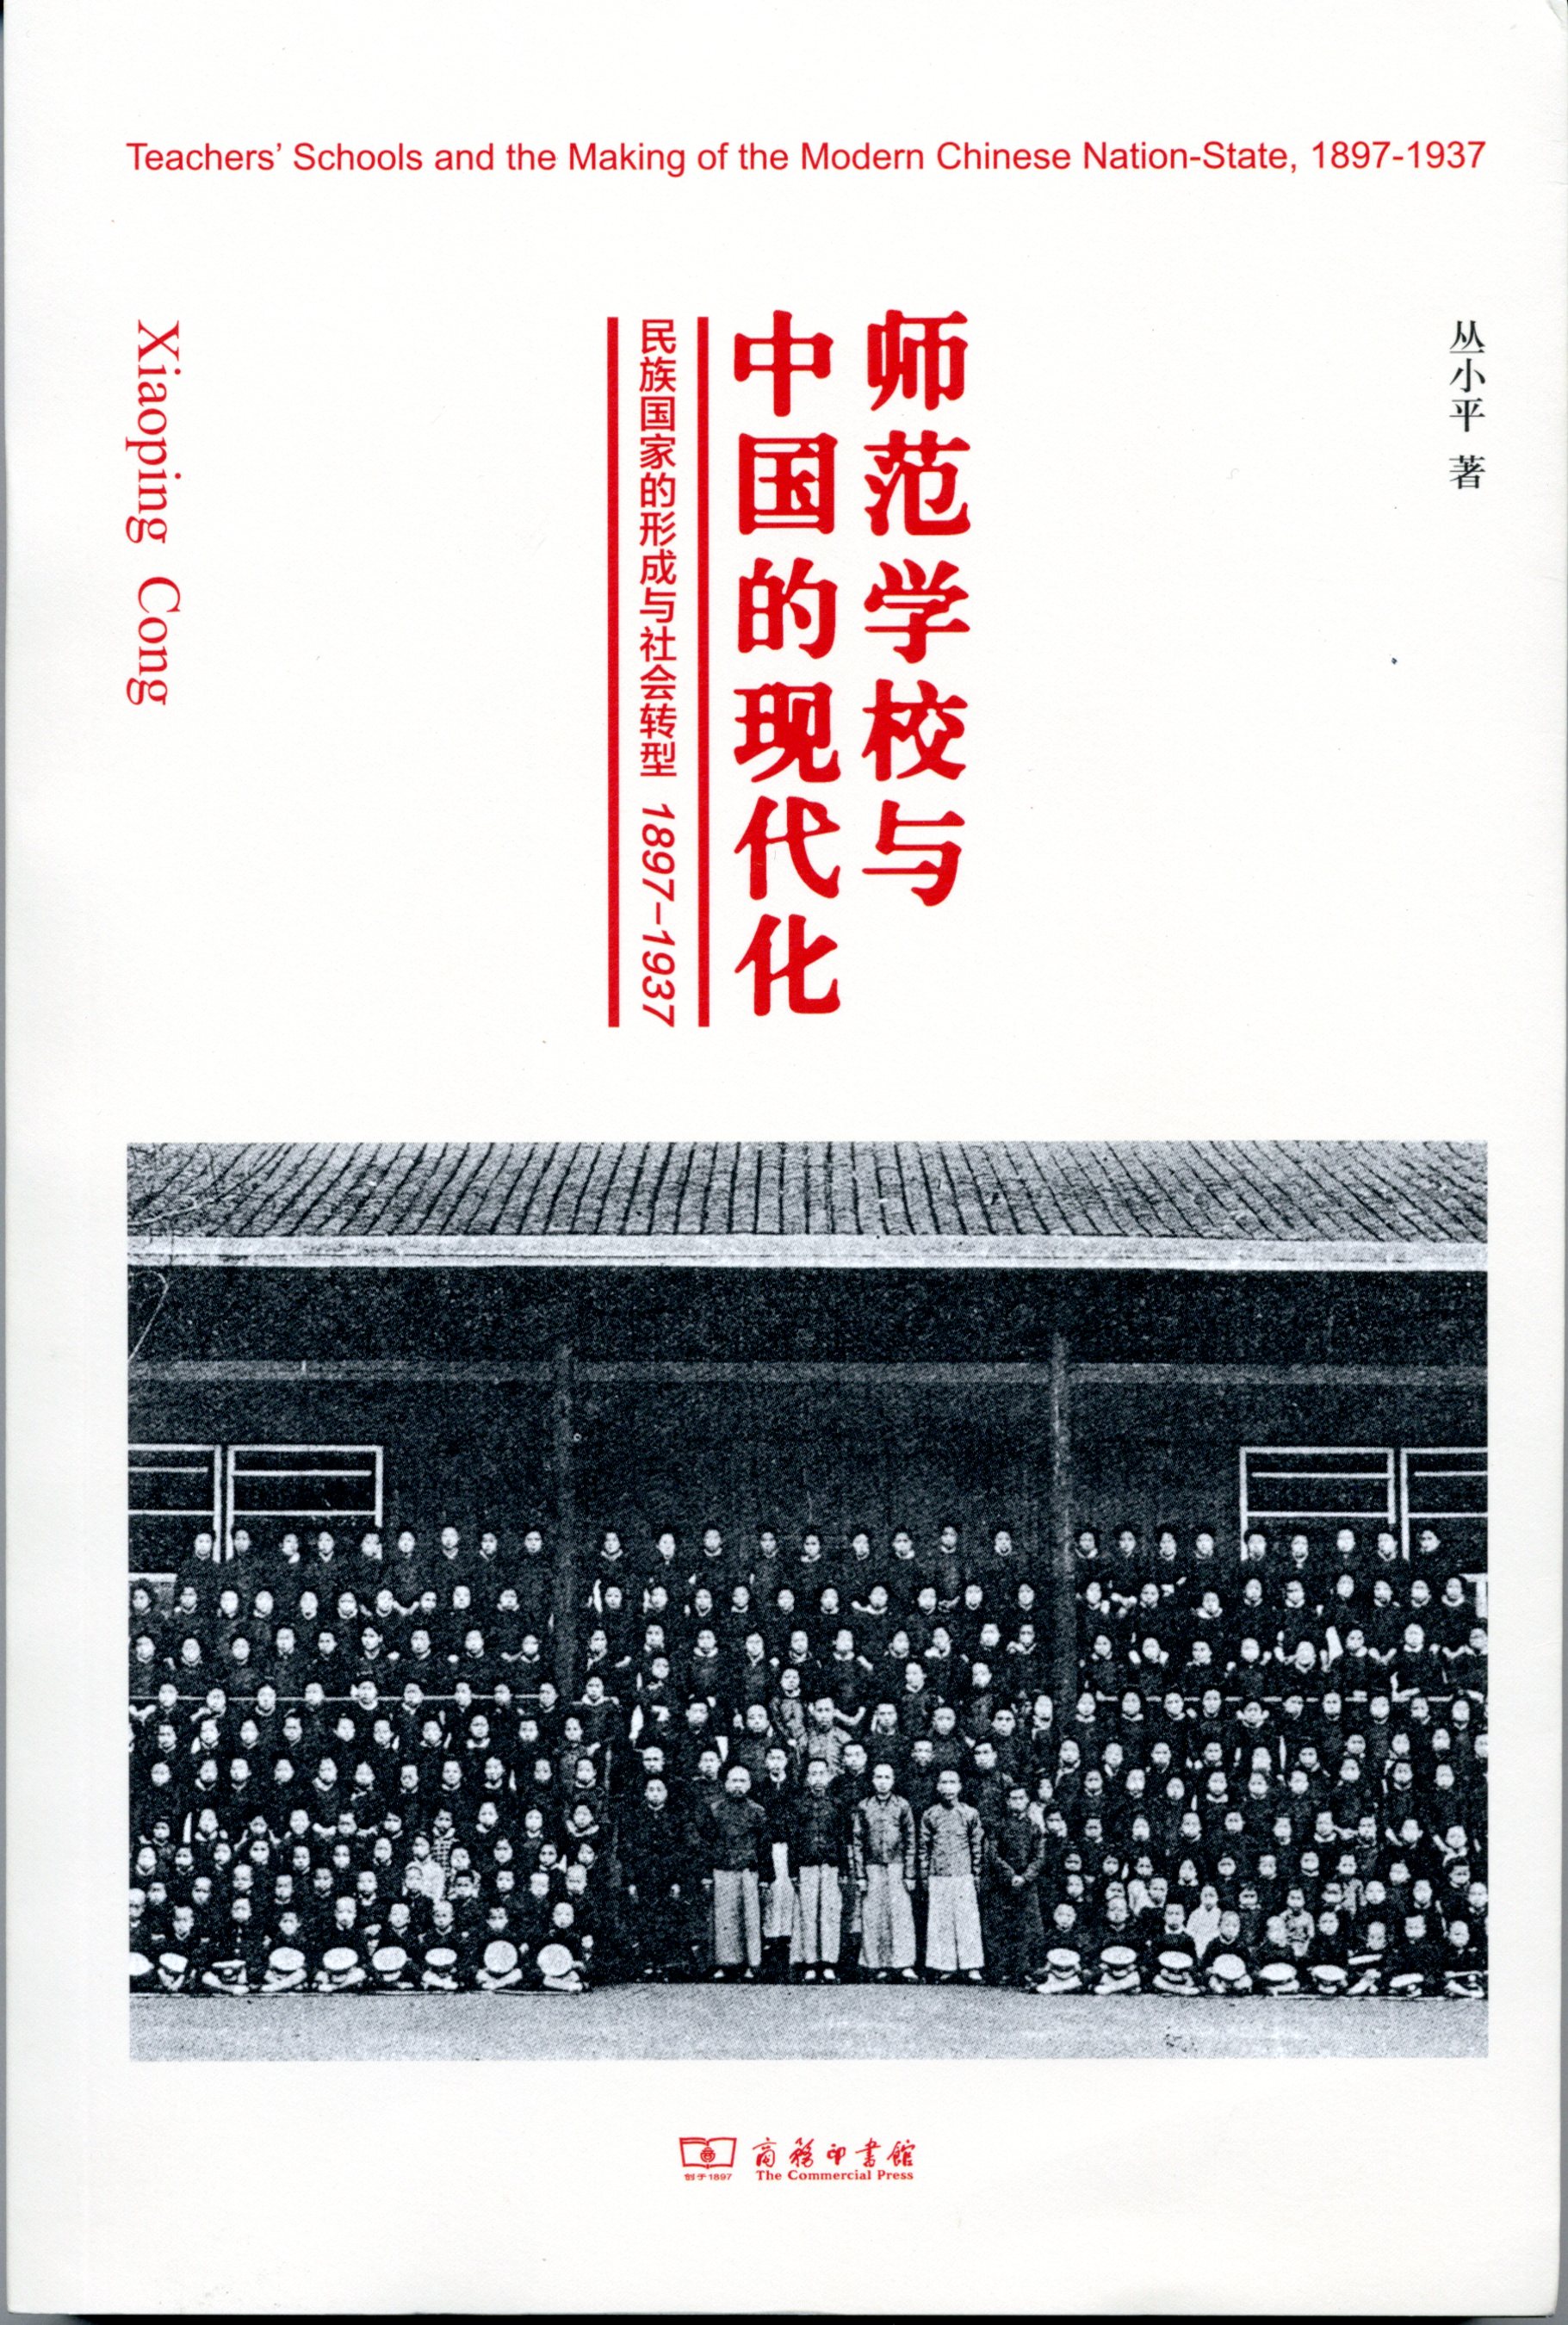 Xiaoping Cong’s Teachers' Schools in China's Modernization: the Nation-State and the Social Transformation, 1897-1937